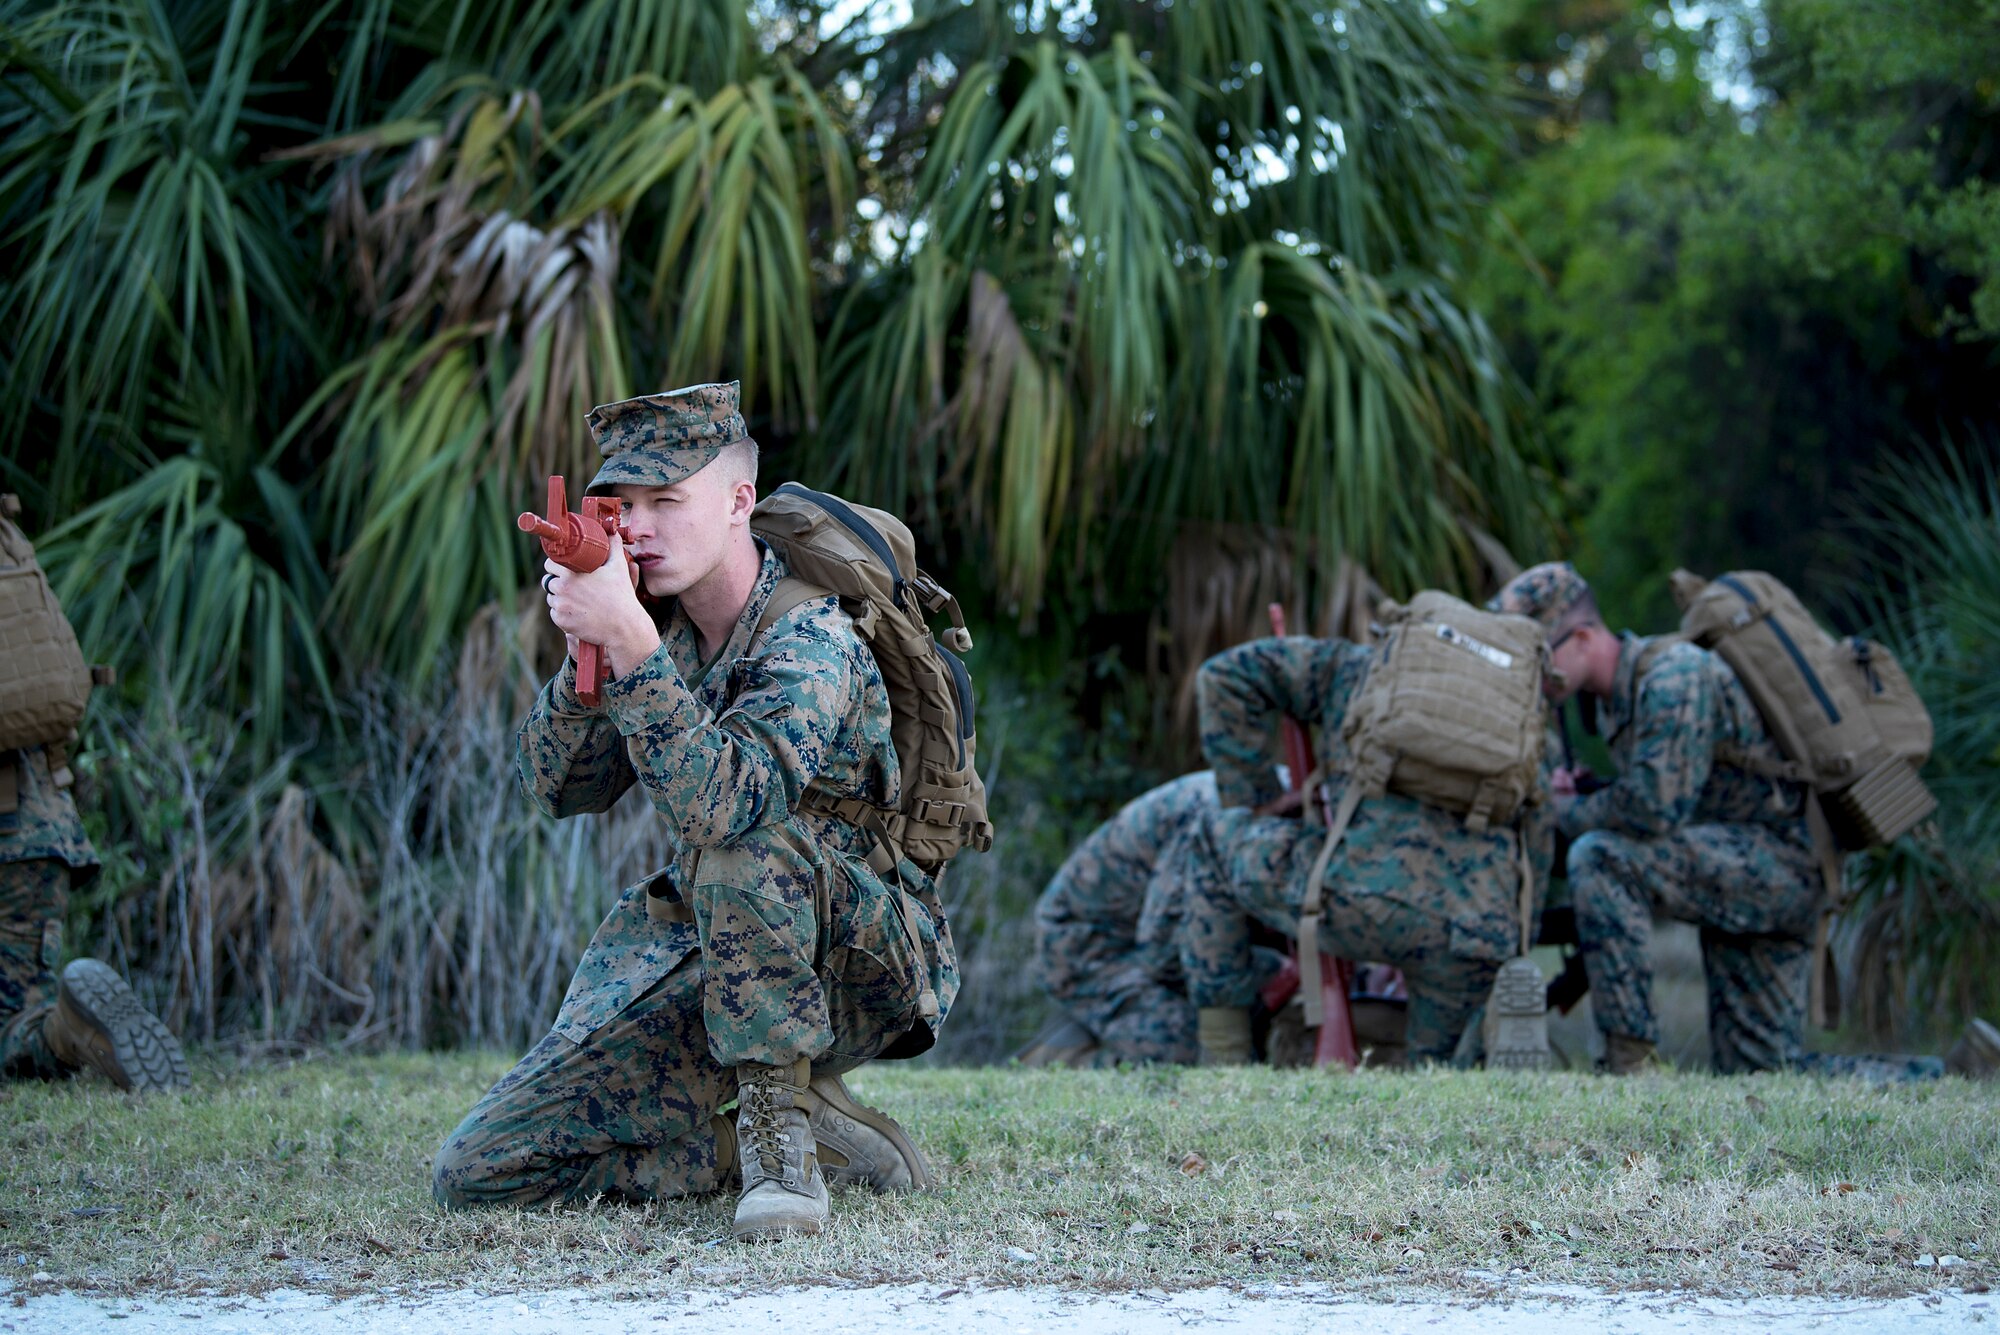 A U.S. Marine provides security during a U.S. Marine Corps Forces Central Command noncommissioned officers (NCO) field exercise at MacDill Air Force Base, Fla., March 14-15, 2018. The FieldEx provided Marine NCO’s the opportunity to hone their basic Marine Corps skills in a field environment, while building camaraderie.